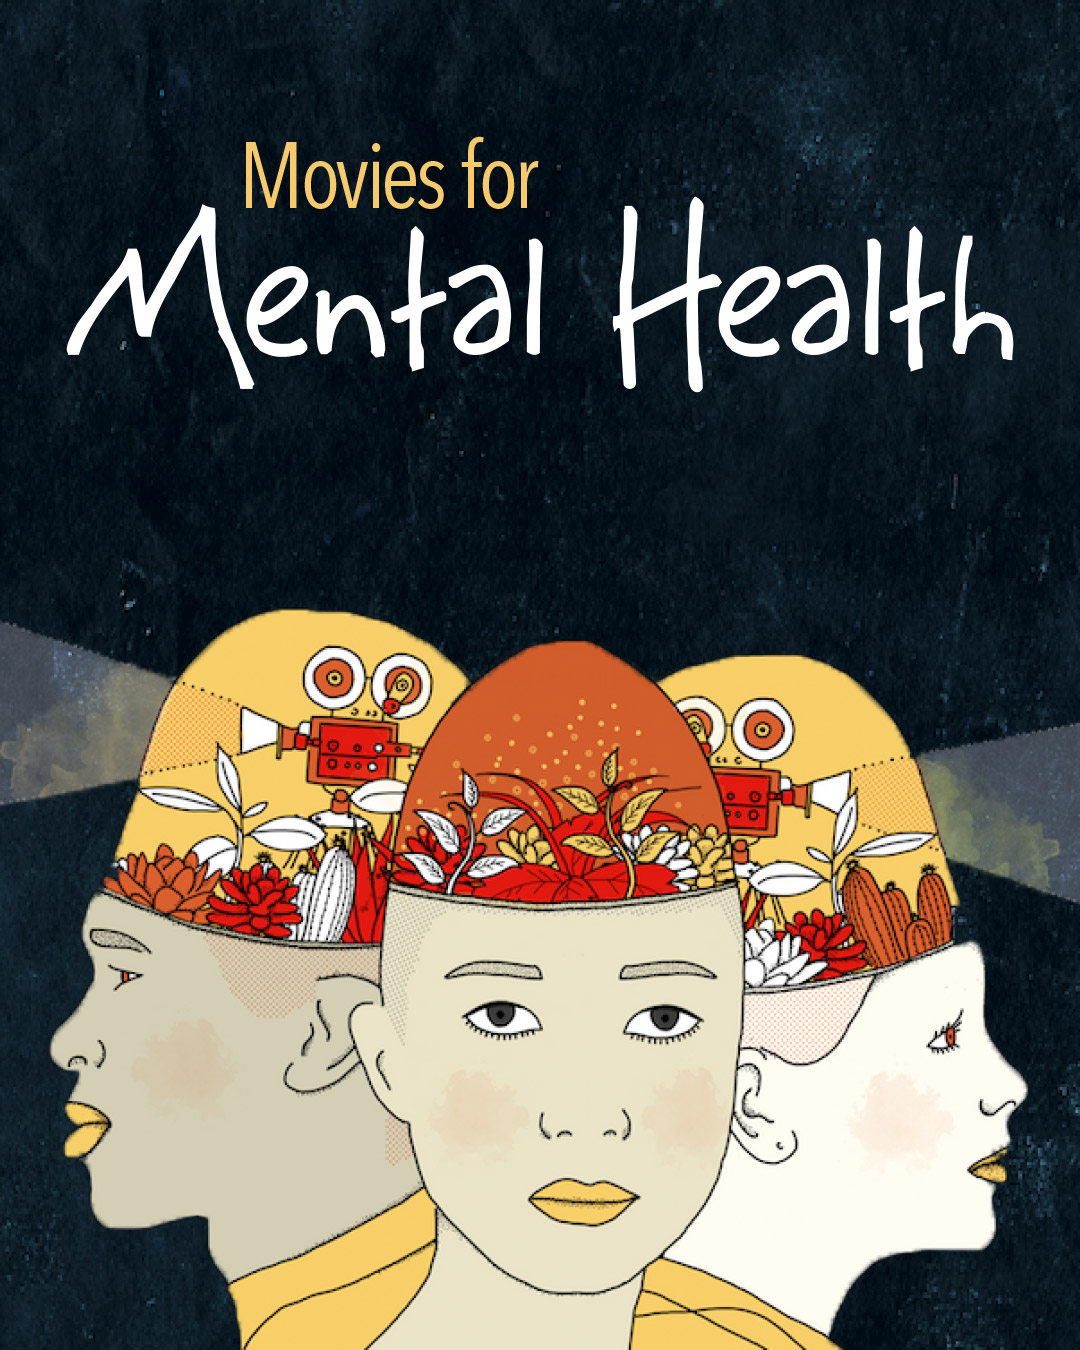 Movies for Mental Health illustration